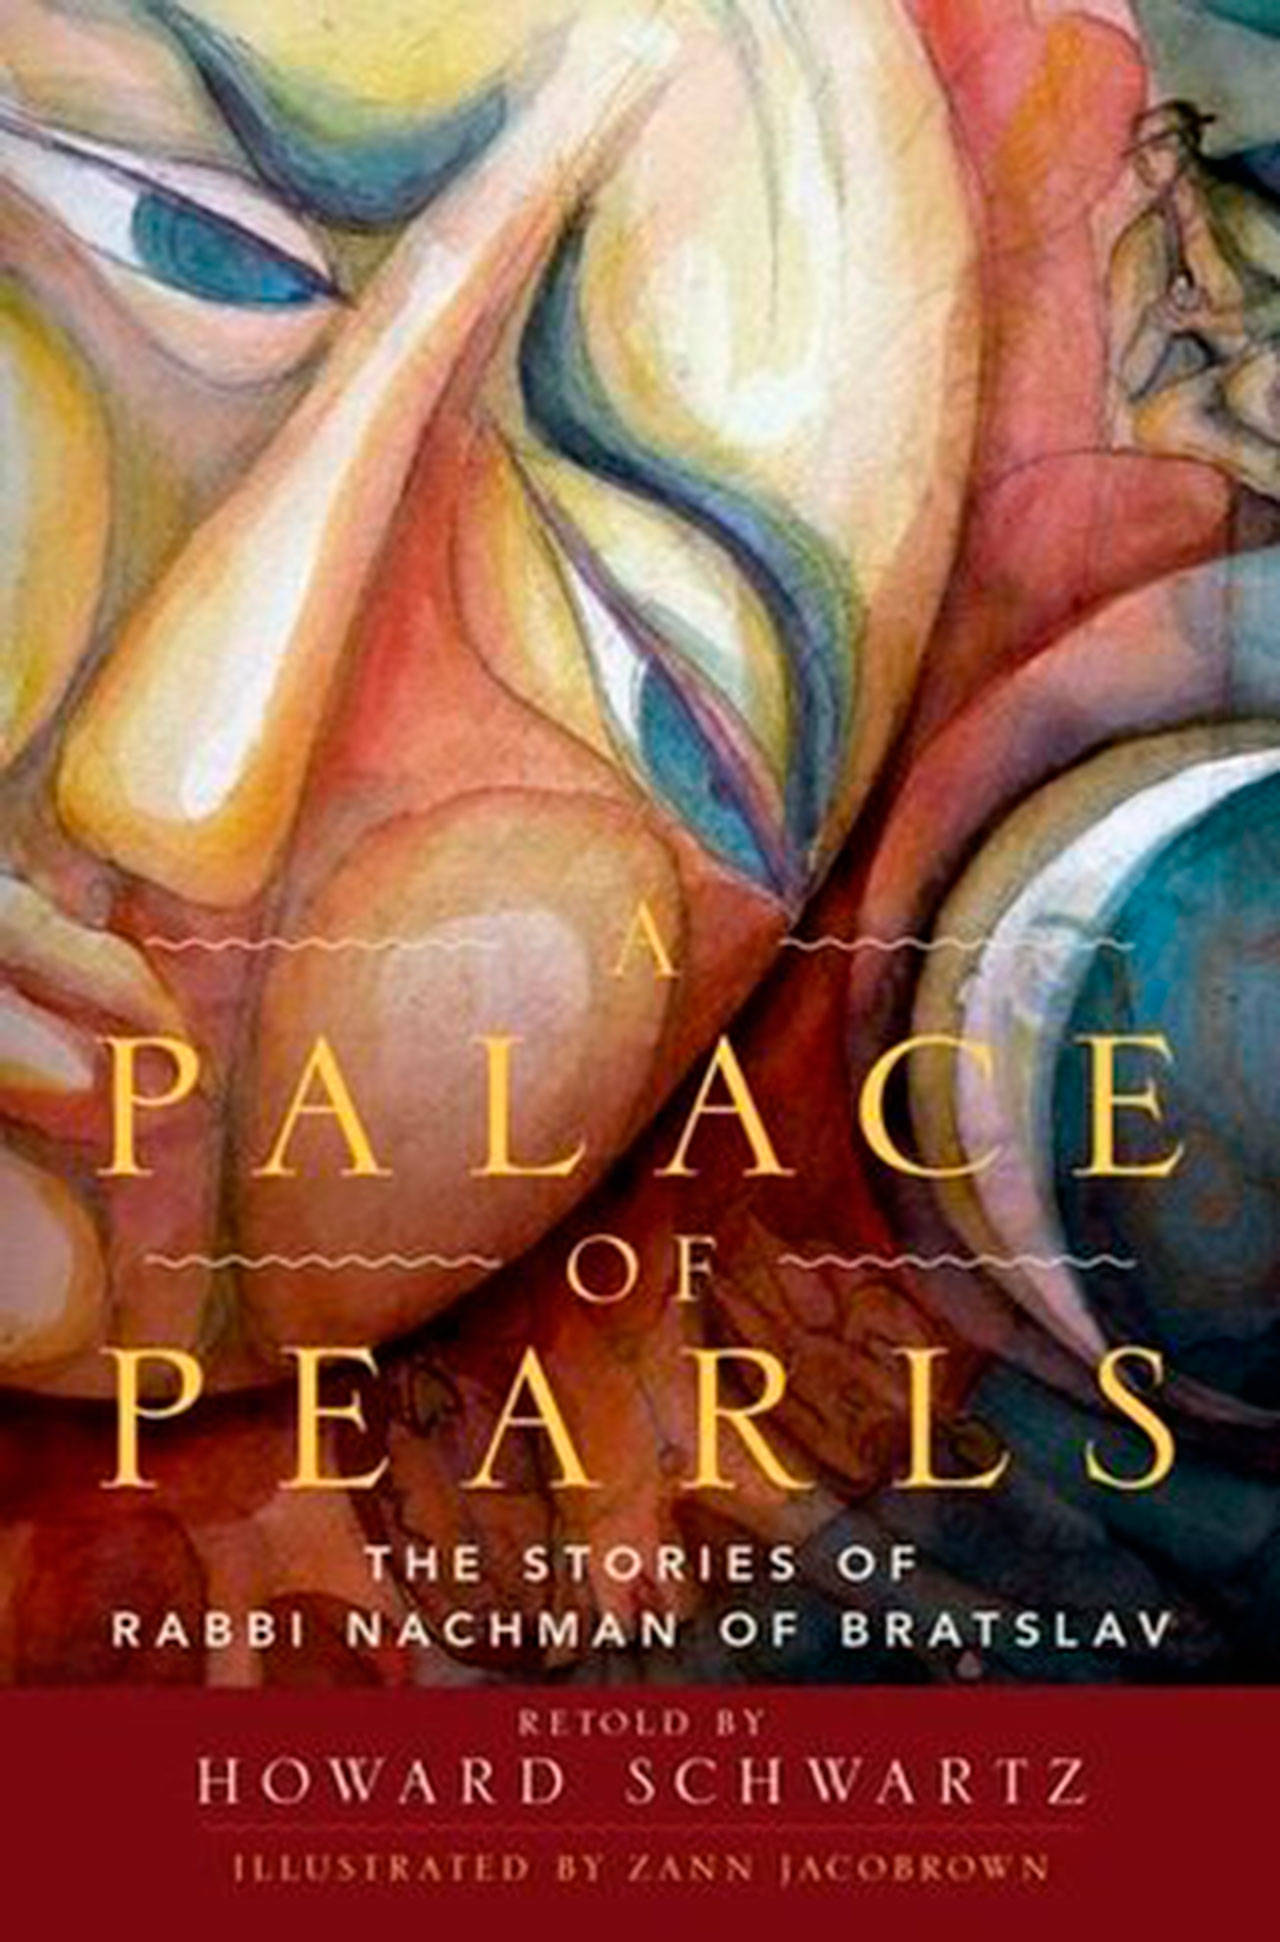 Image courtesy of Eagle Harbor Book Company | Indianola-based artist and Jewish scholar Zann Jacobrown will visit Eagle Harbor Book Company at 6:30 p.m. Thursday, Sept. 6 to discuss “Palace of Pearls: The Stories of Rabbi Nachman of Bratslav,” which she illustrated.